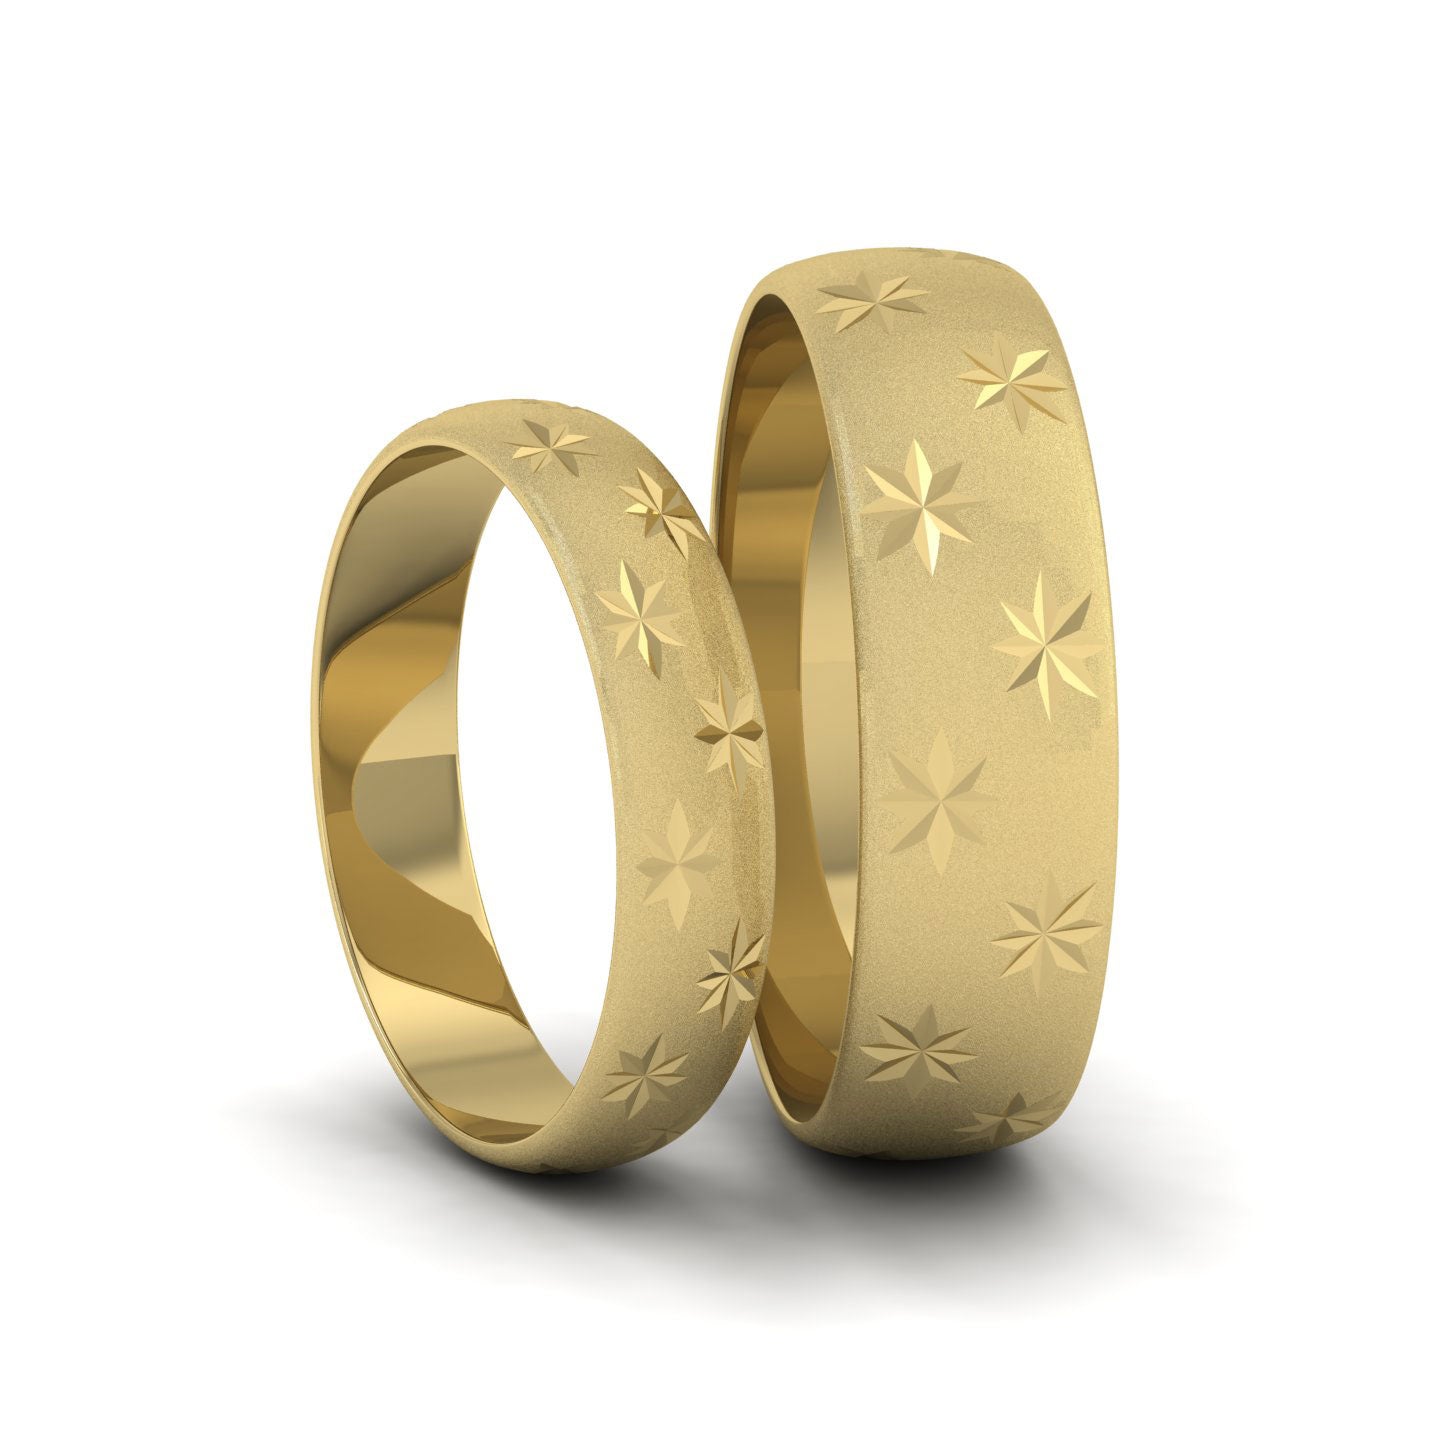 Star Patterned 9ct Yellow Gold 4mm Wedding Ring